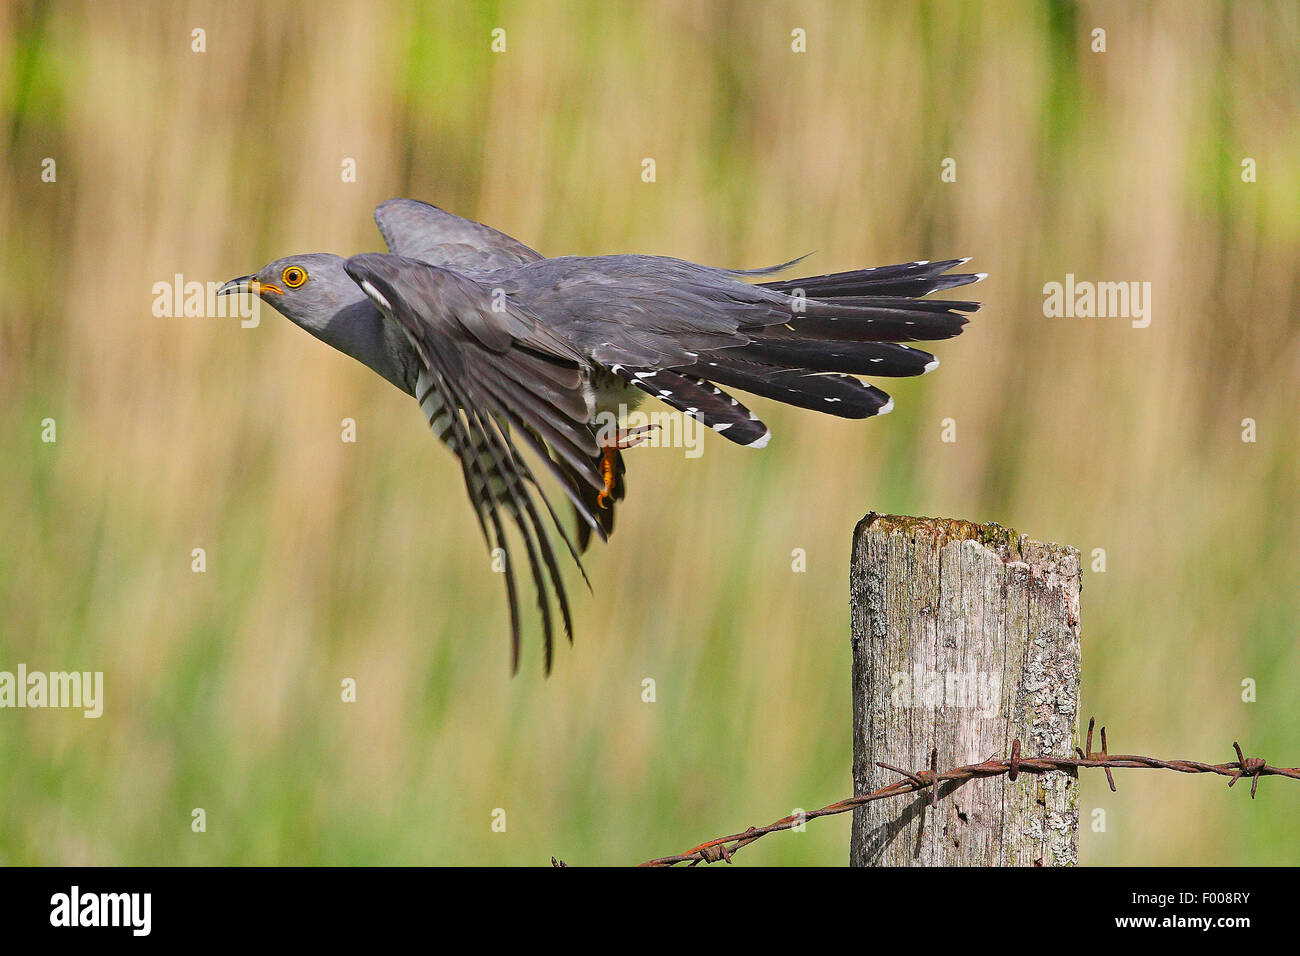 Eurasian cuckoo (Cuculus canorus), taking off from a wooden post, Germany Stock Photo